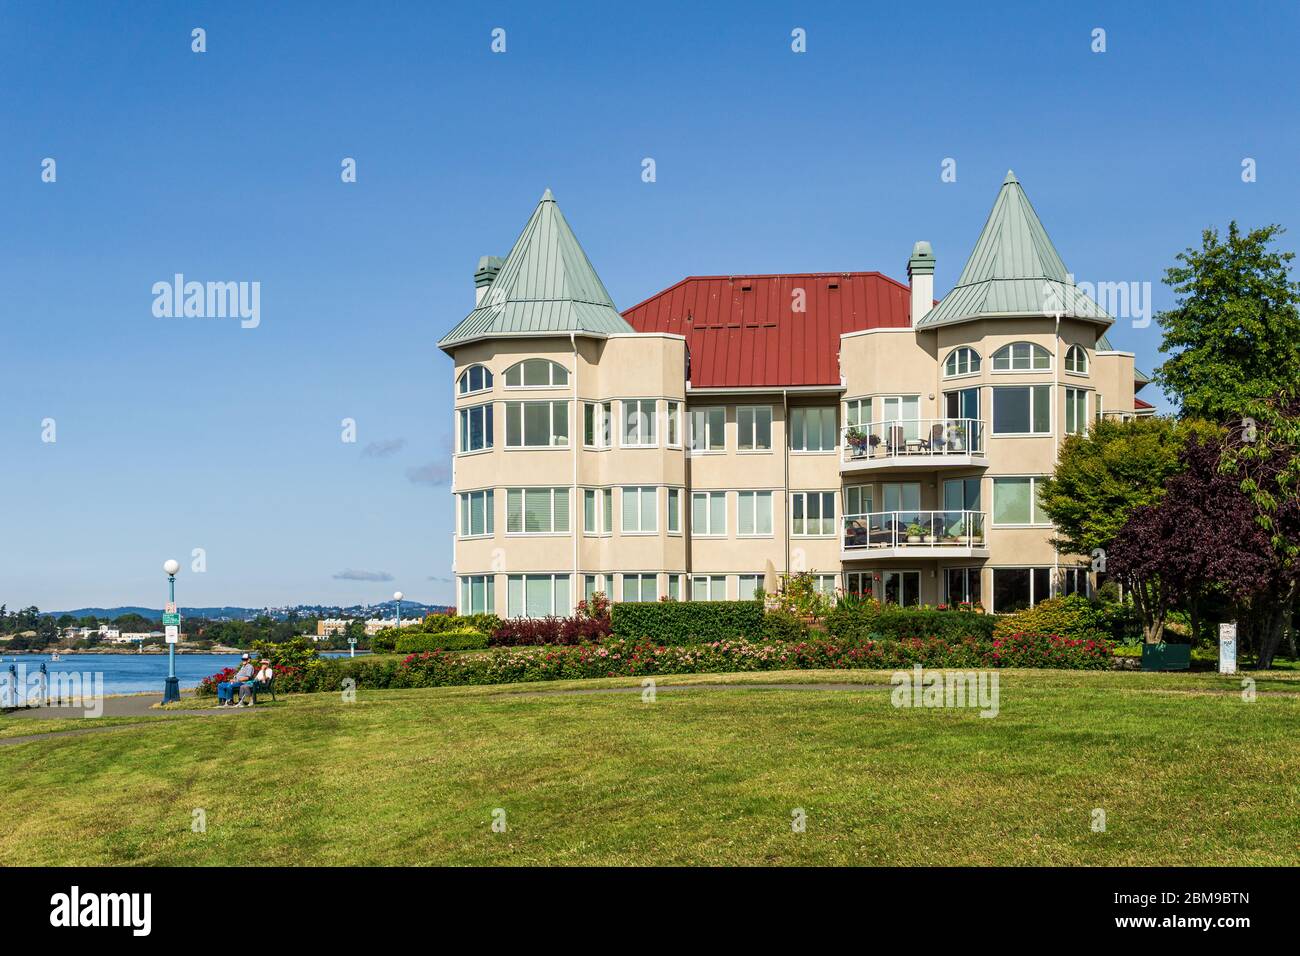 VICTORIA, CANADA - JULY 14, 2019: Modern apartment building facade view with big green lawn. Stock Photo